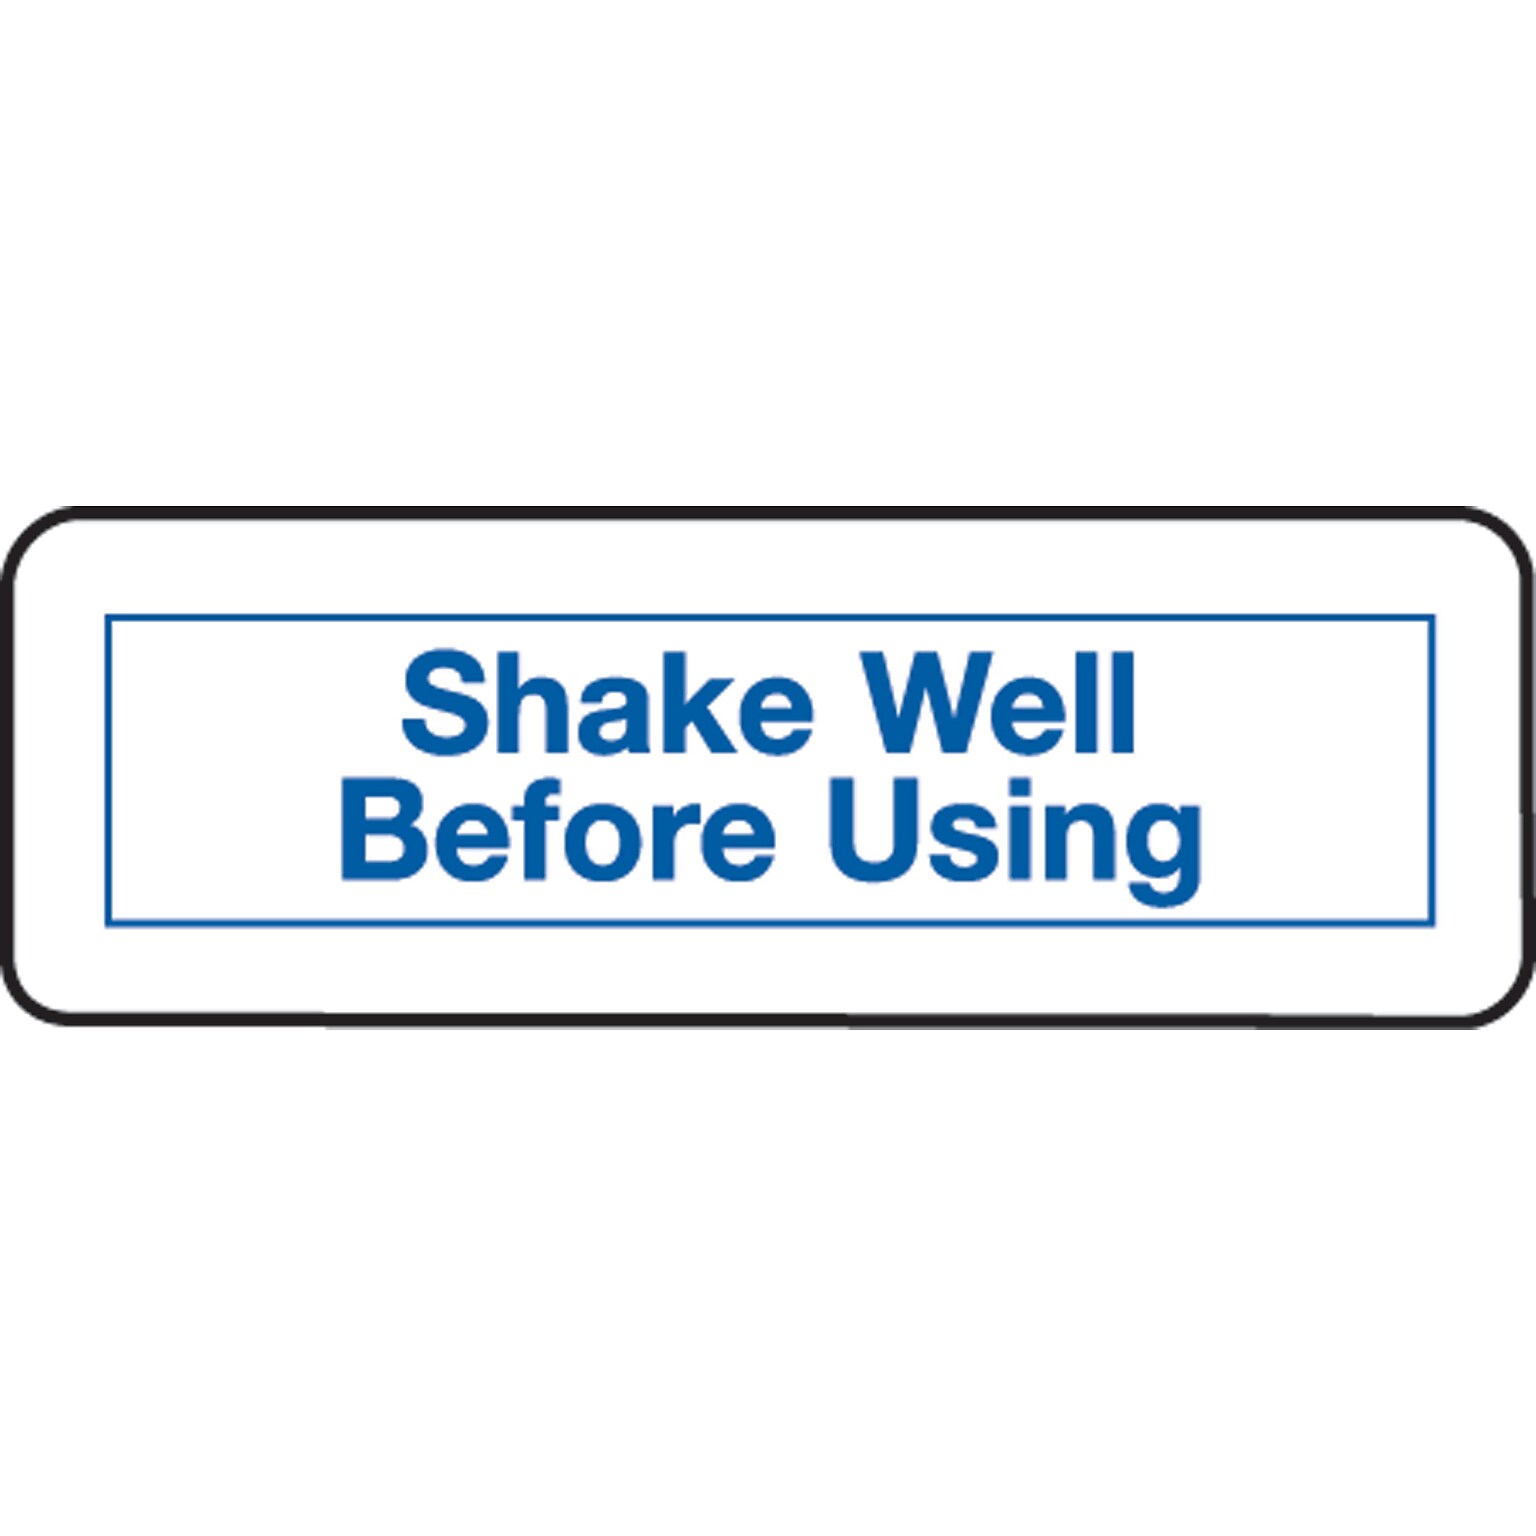 Medical Arts Press® Medication Instruction Labels, Shake Well Before Using, White, 1/2x1-1/2, 500 Labels